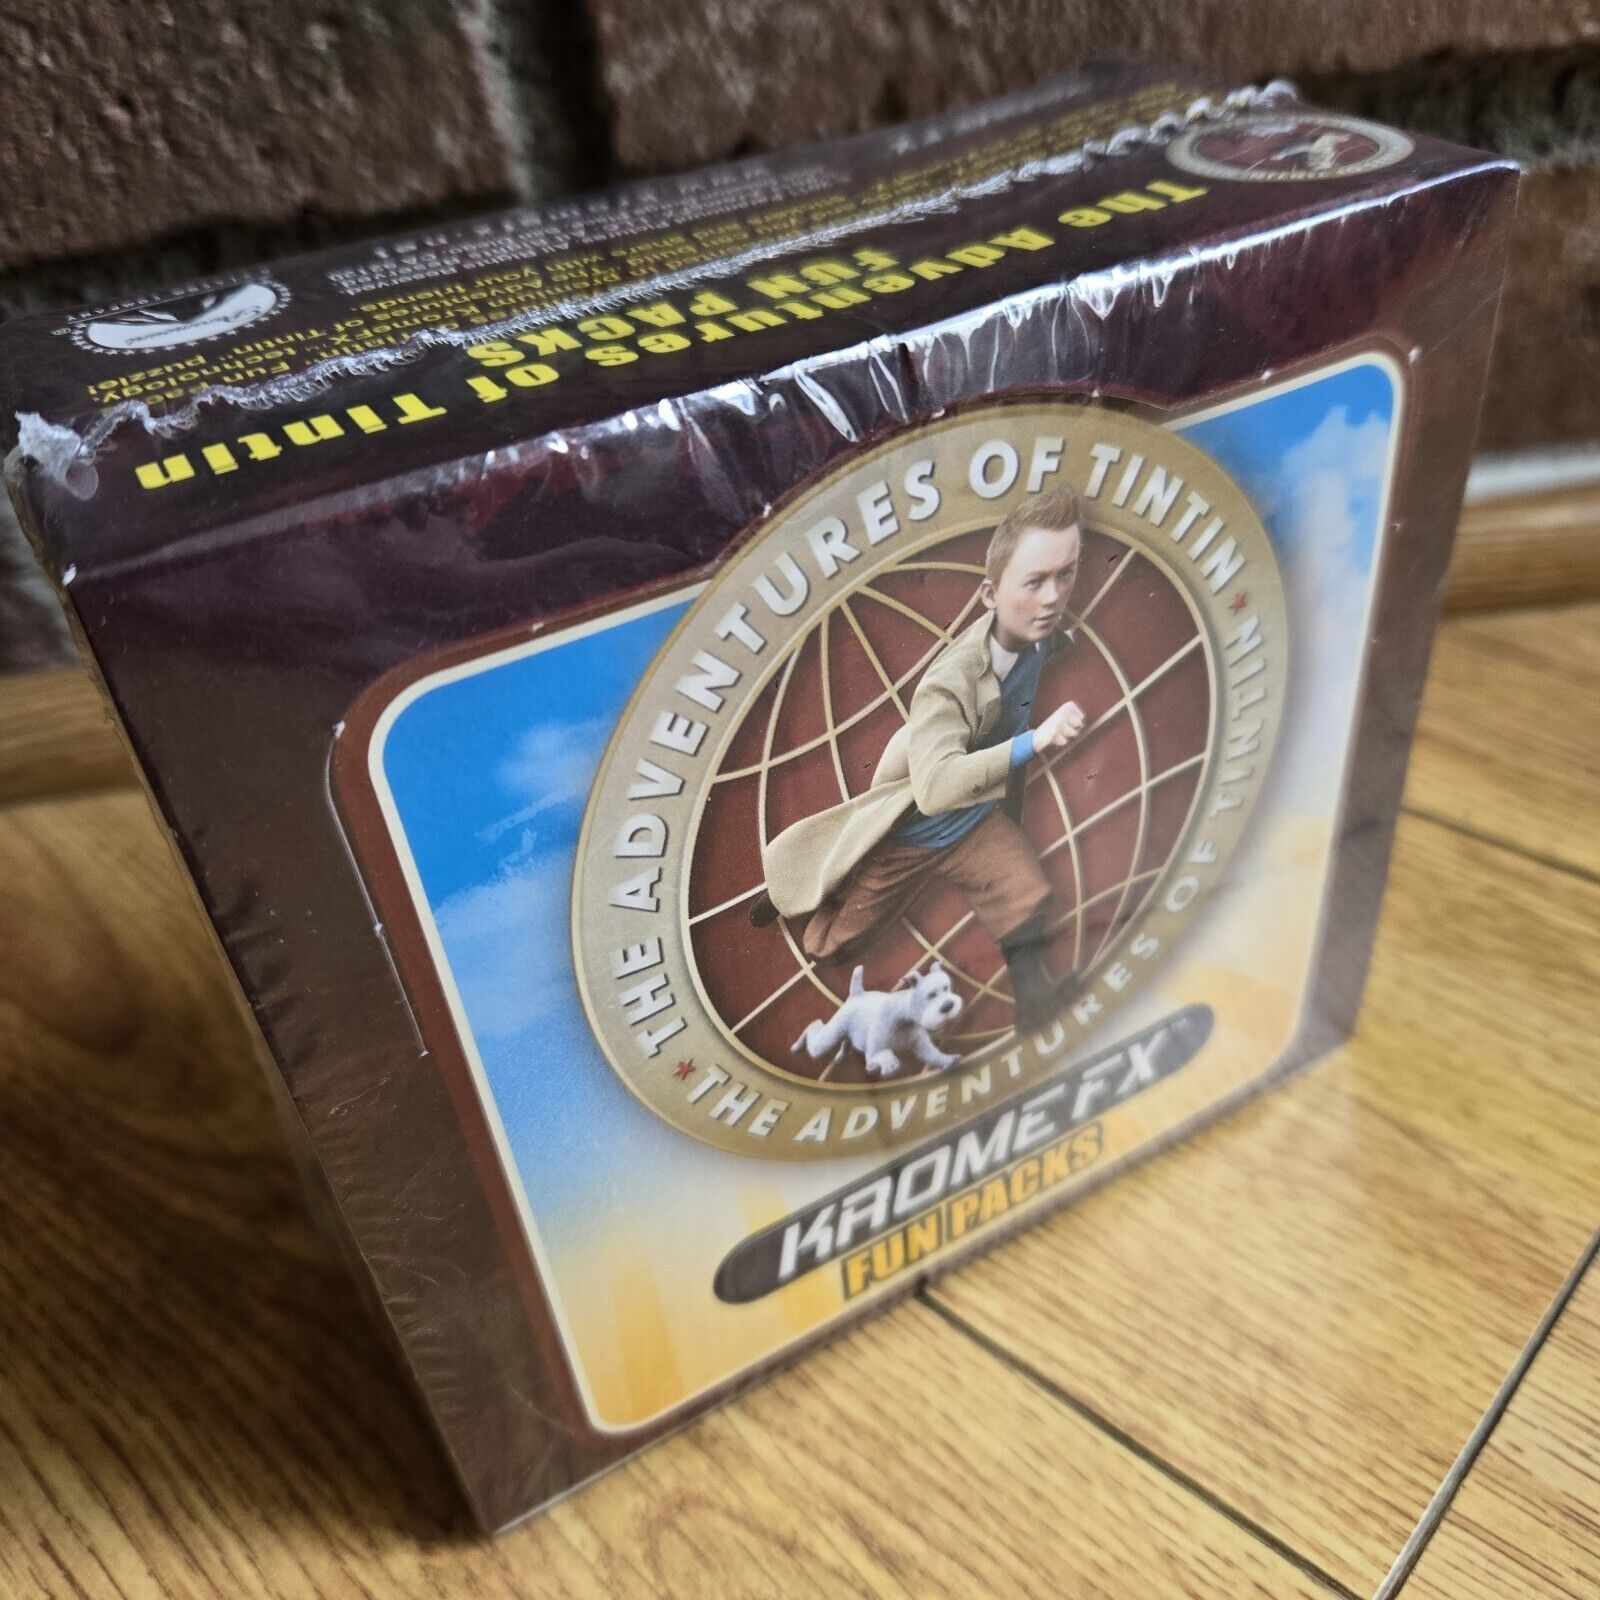 EXTREMELY RARE SEALED: 2011 Adventures of Tintin Krome Fx Trading Cards Box